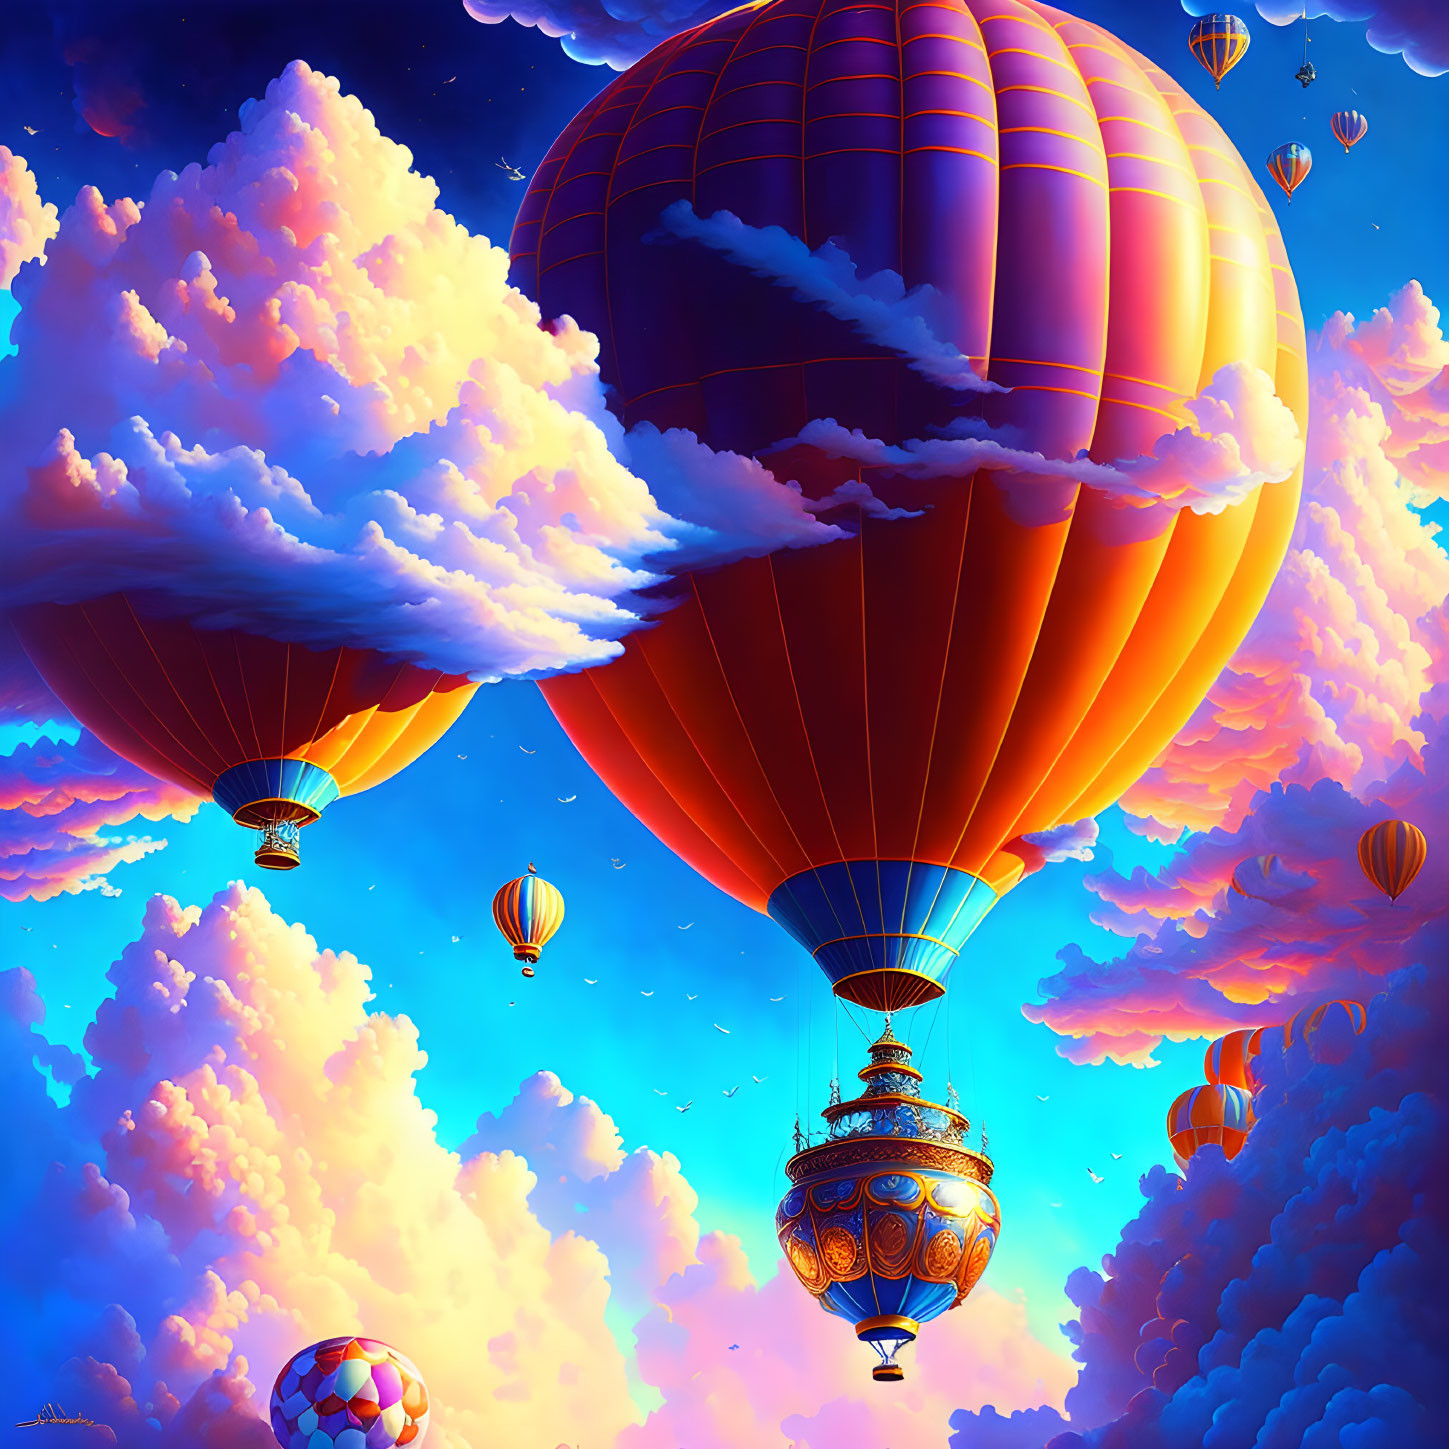 Colorful hot air balloons float in blue sky at sunset